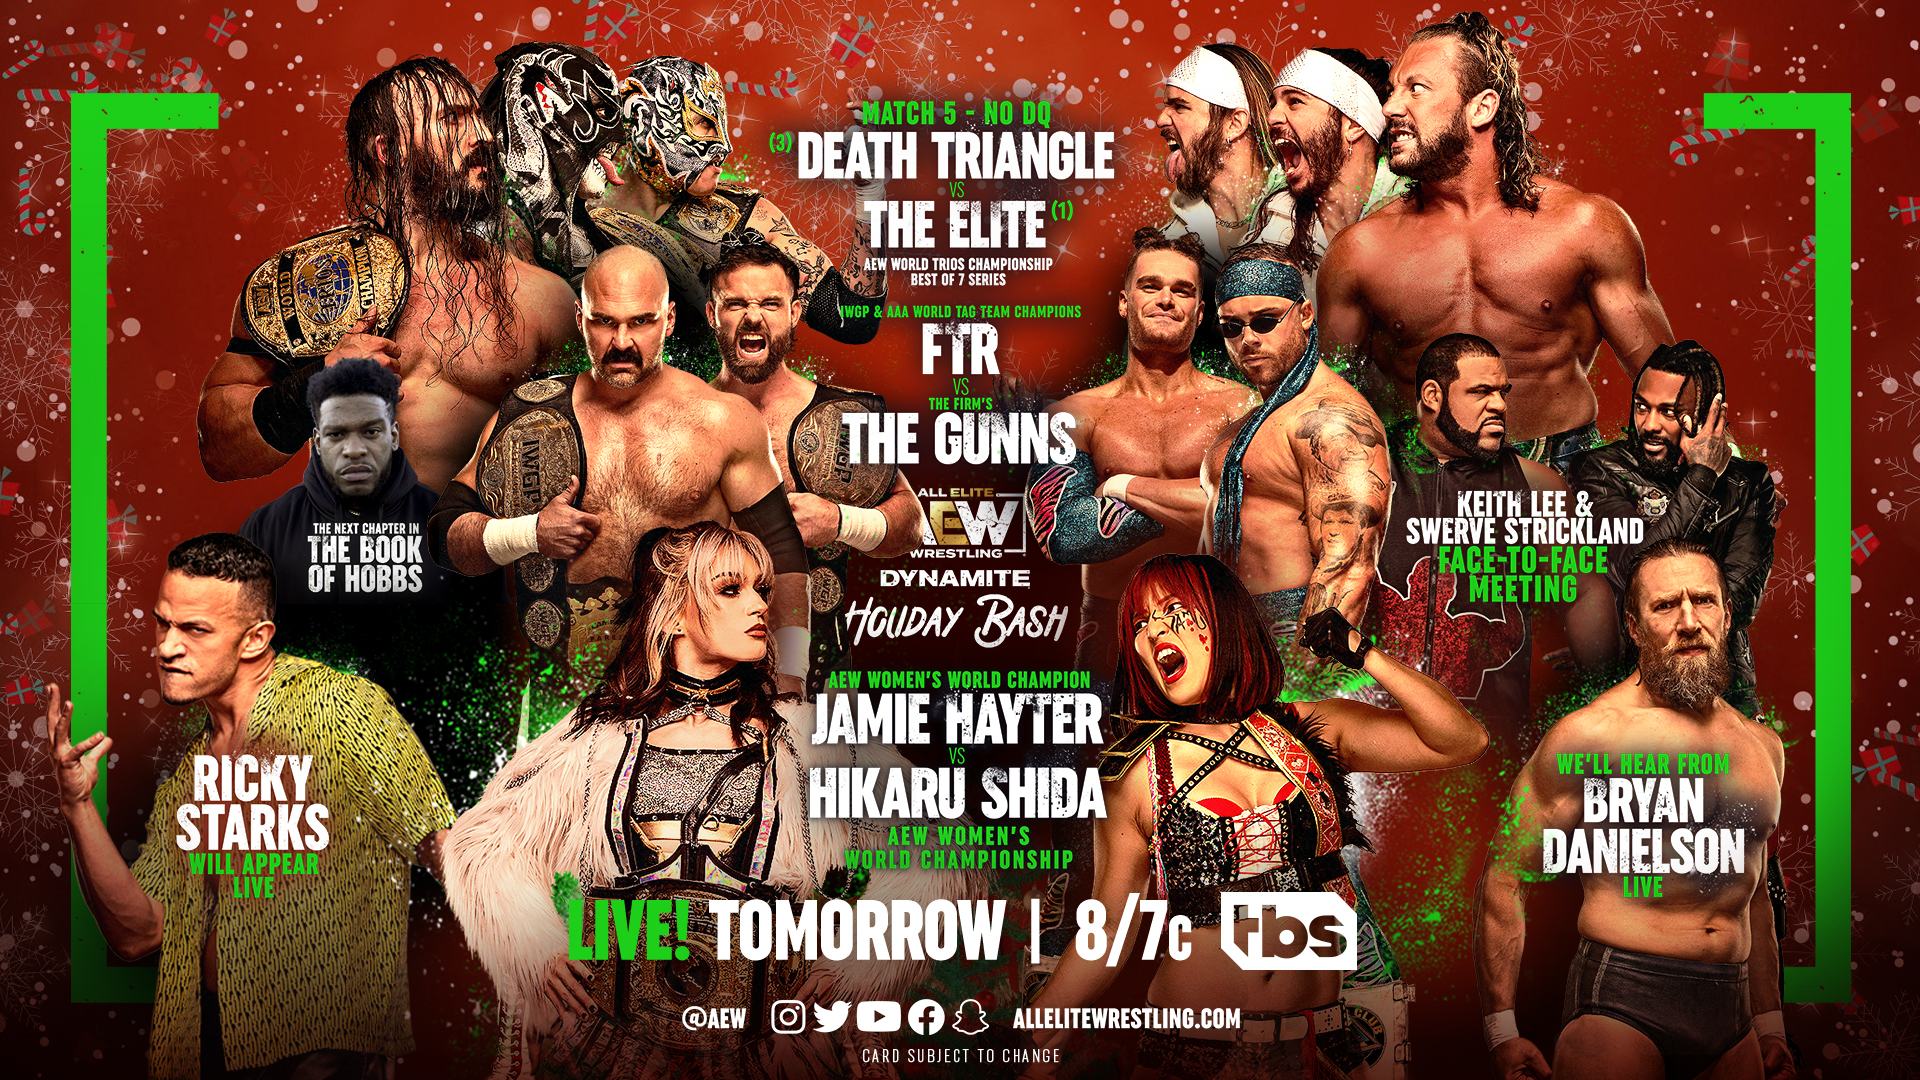 Updated Line-Up For AEW Dynamite Holiday Bash